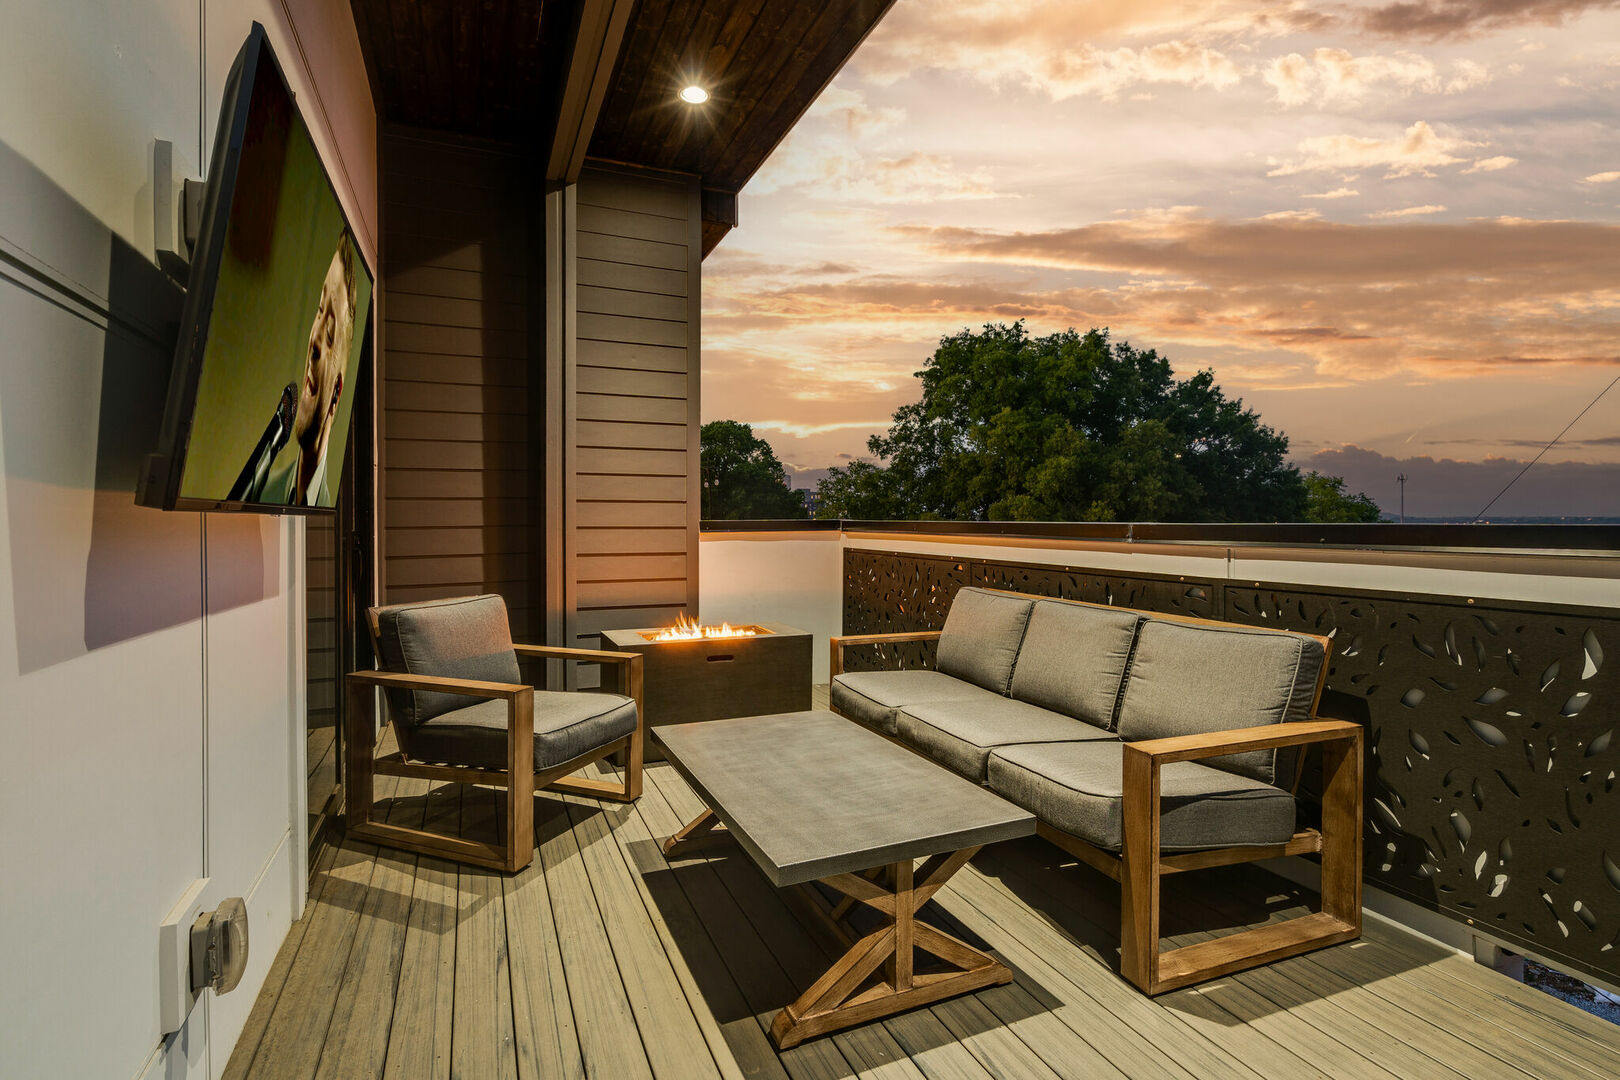 4th unit: Rooftop balcony with fire pit, smart TV, outdoor BBQ grill, and lounge area.